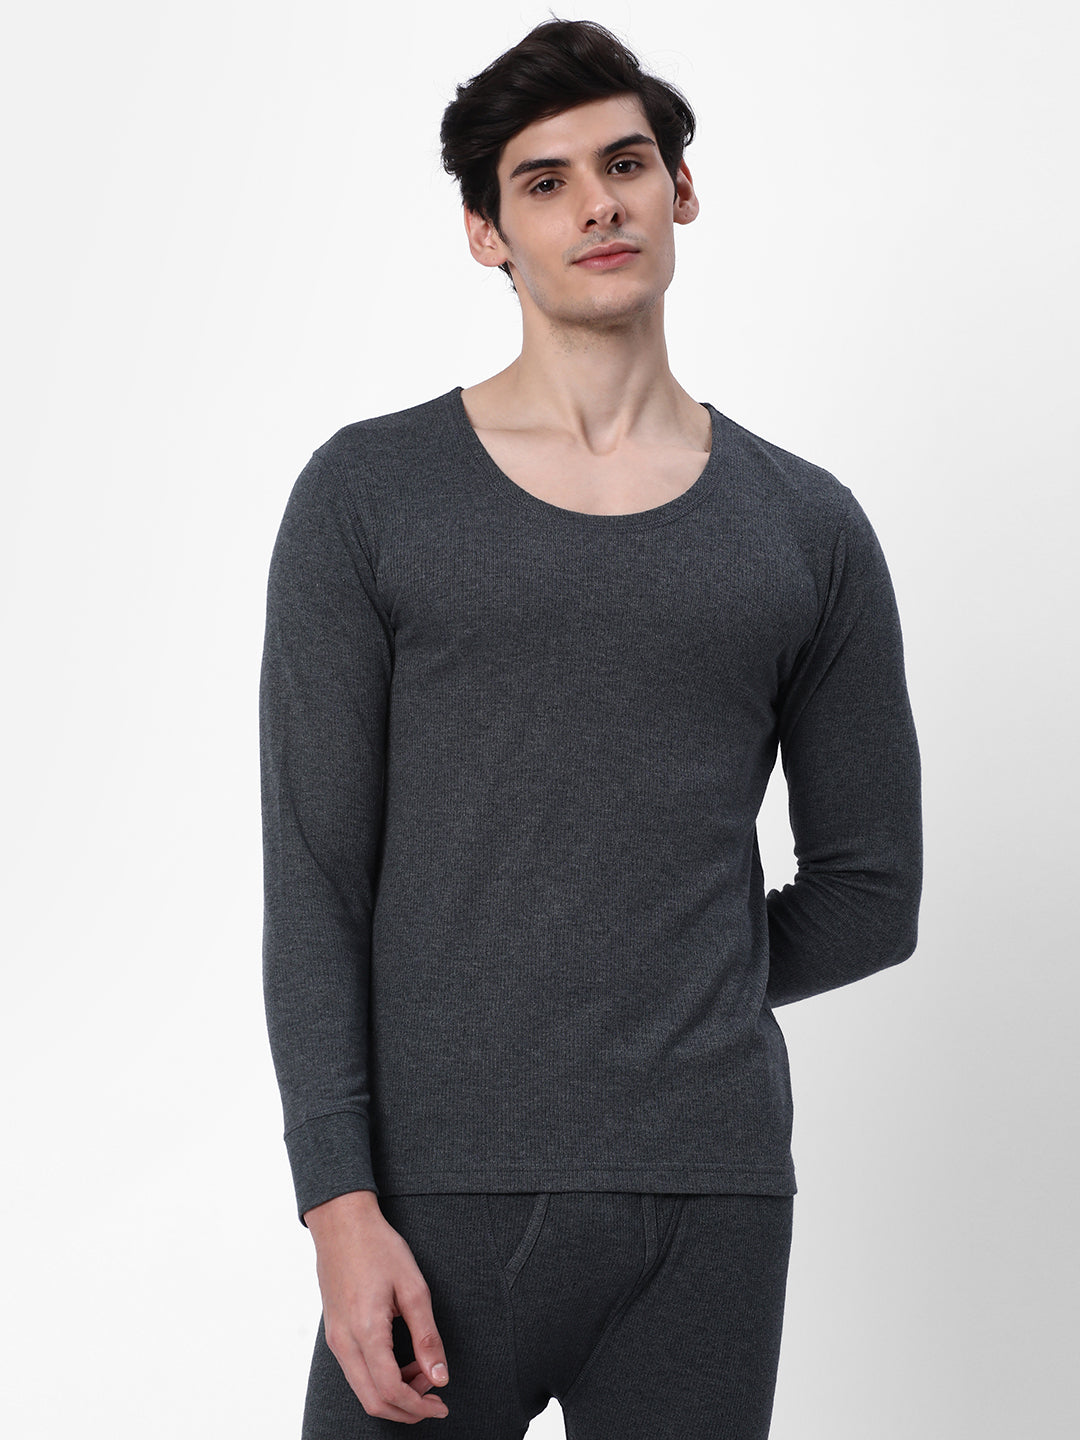 Cotstyle Men's Super Combed Cotton Fabric Top Innerwear Thermals, Charcoal-Pack of 1, Style no.TH2100